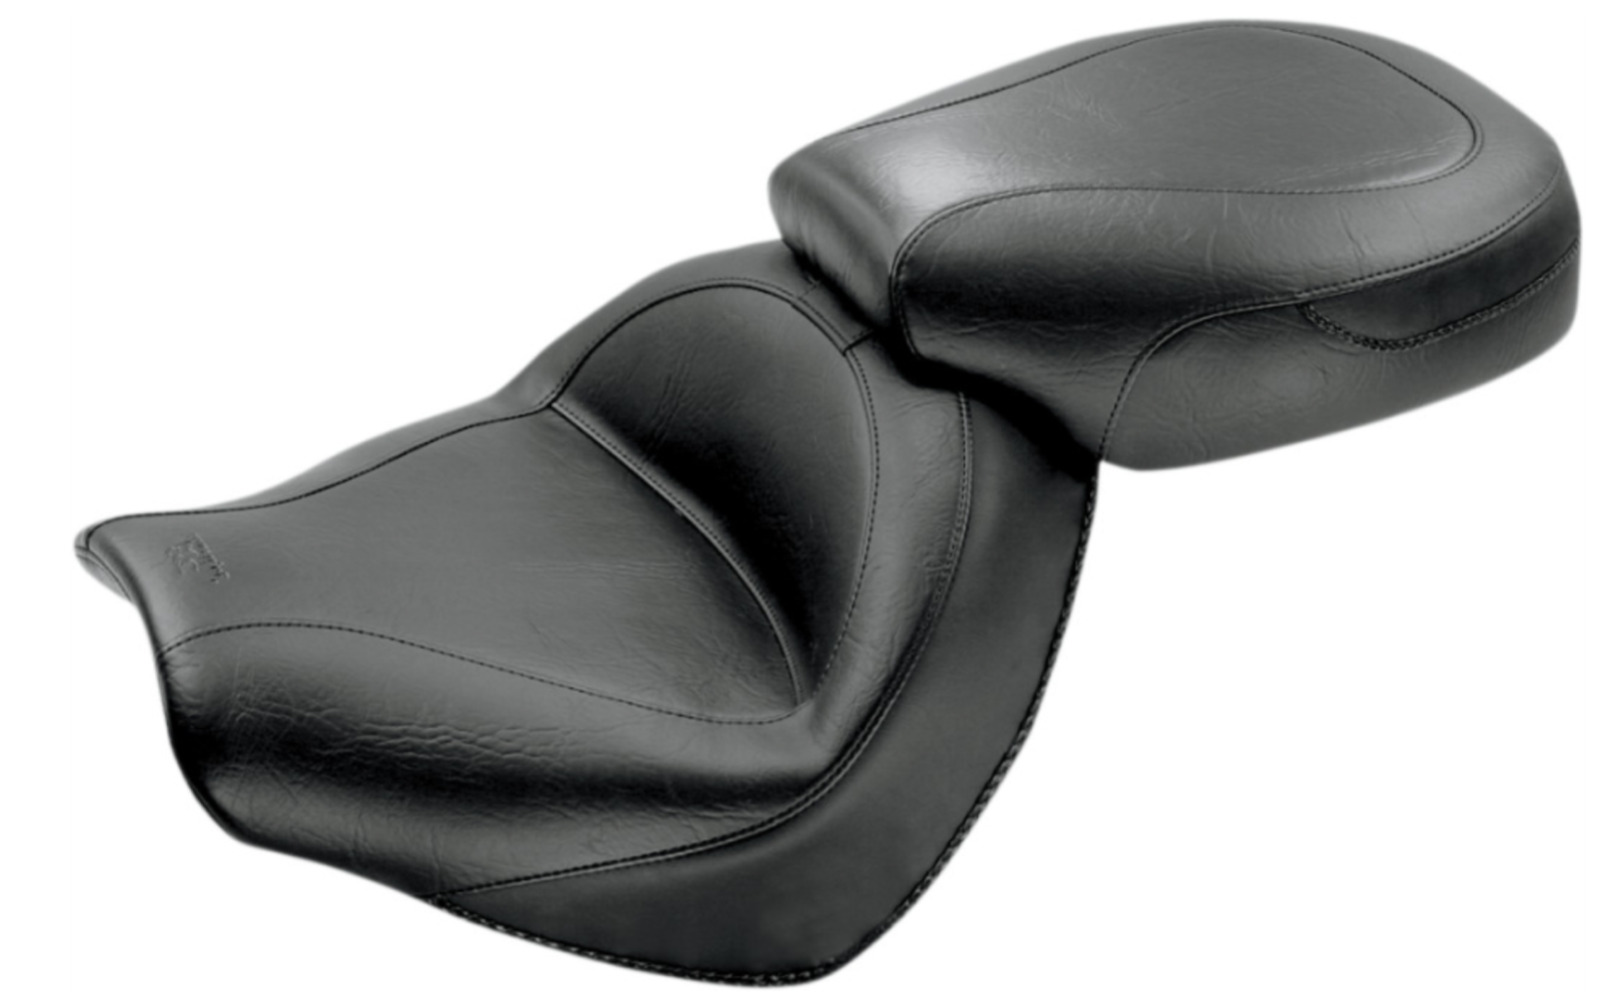 Mustang Black Wide Touring Two Piece Seat for 2004-2009 Honda VTX1300C 76191